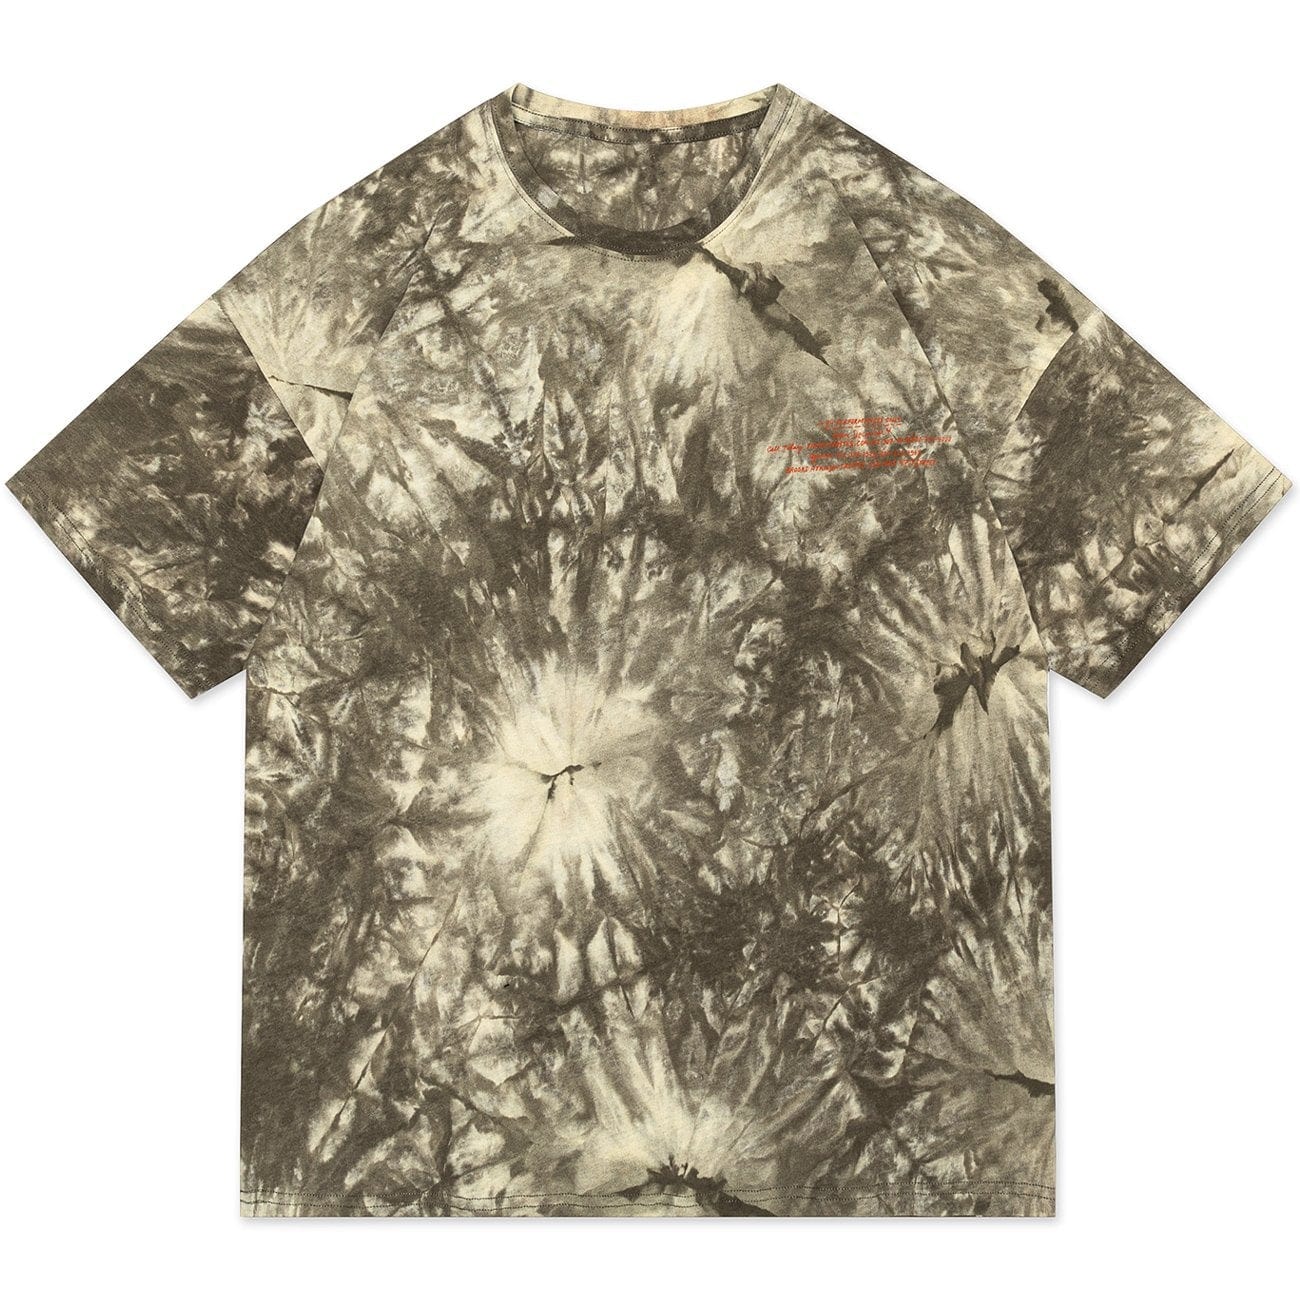 Washed Tie Dye Ghost Graphic Tee Streetwear Brand Techwear Combat Tactical YUGEN THEORY